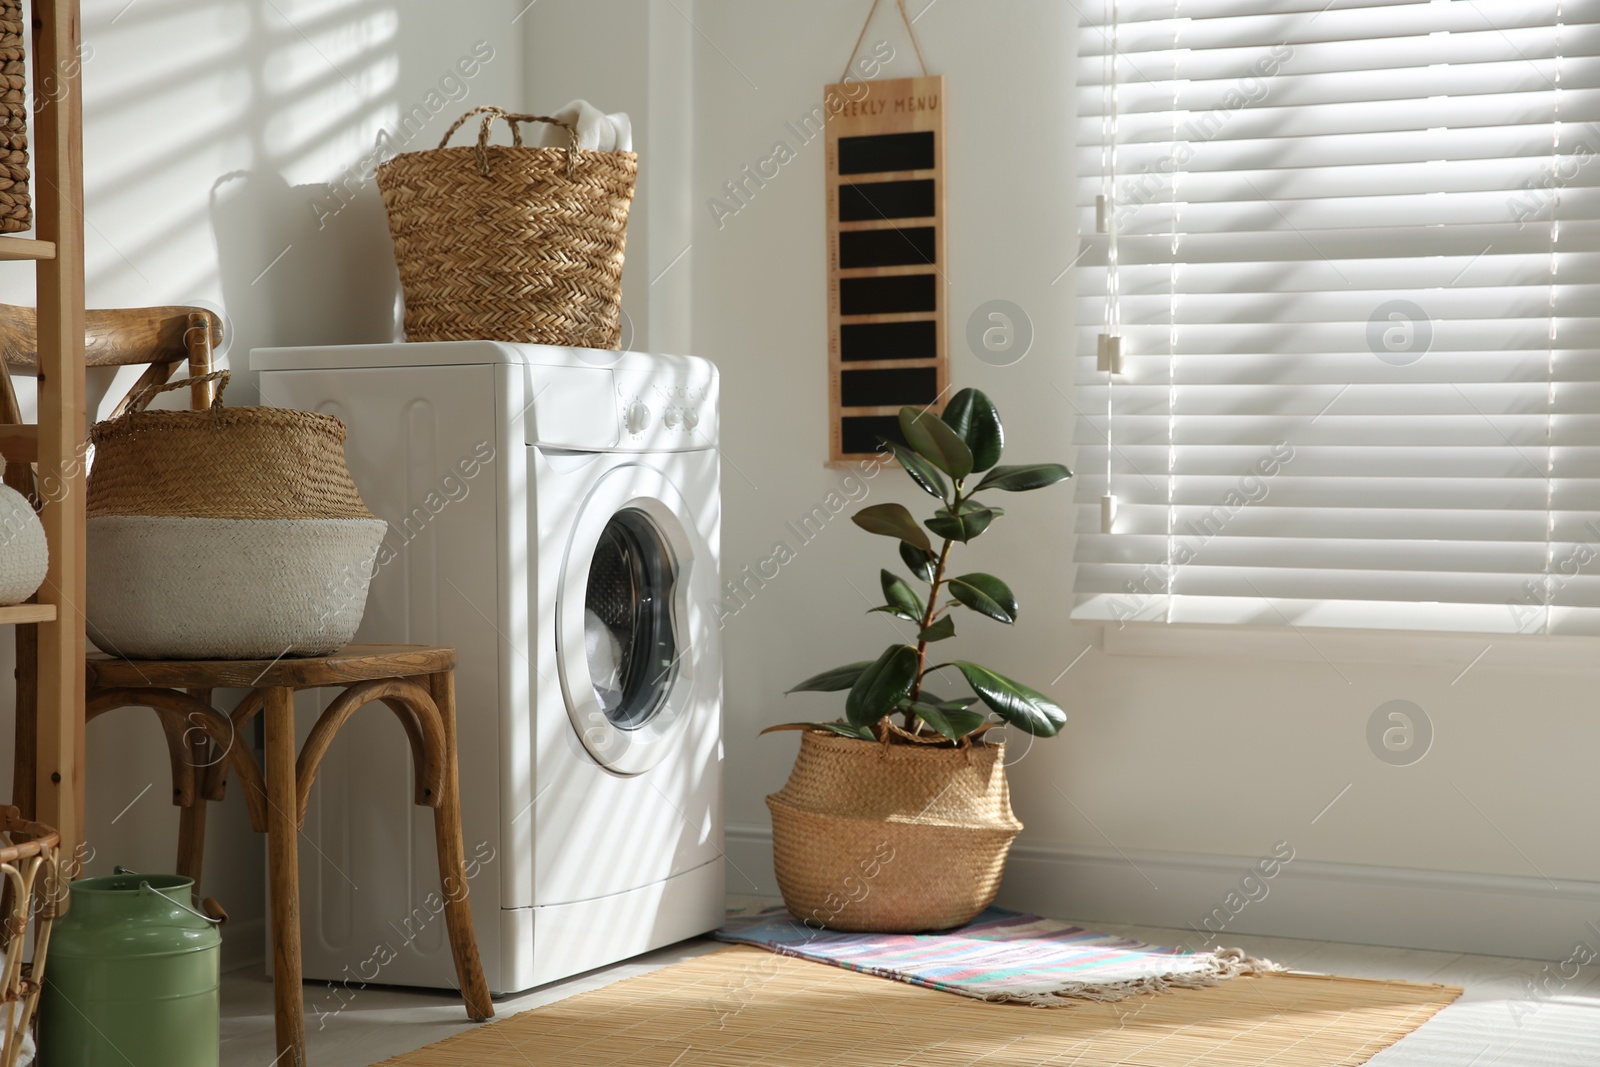 Photo of Modern washing machine and plant in laundry room interior